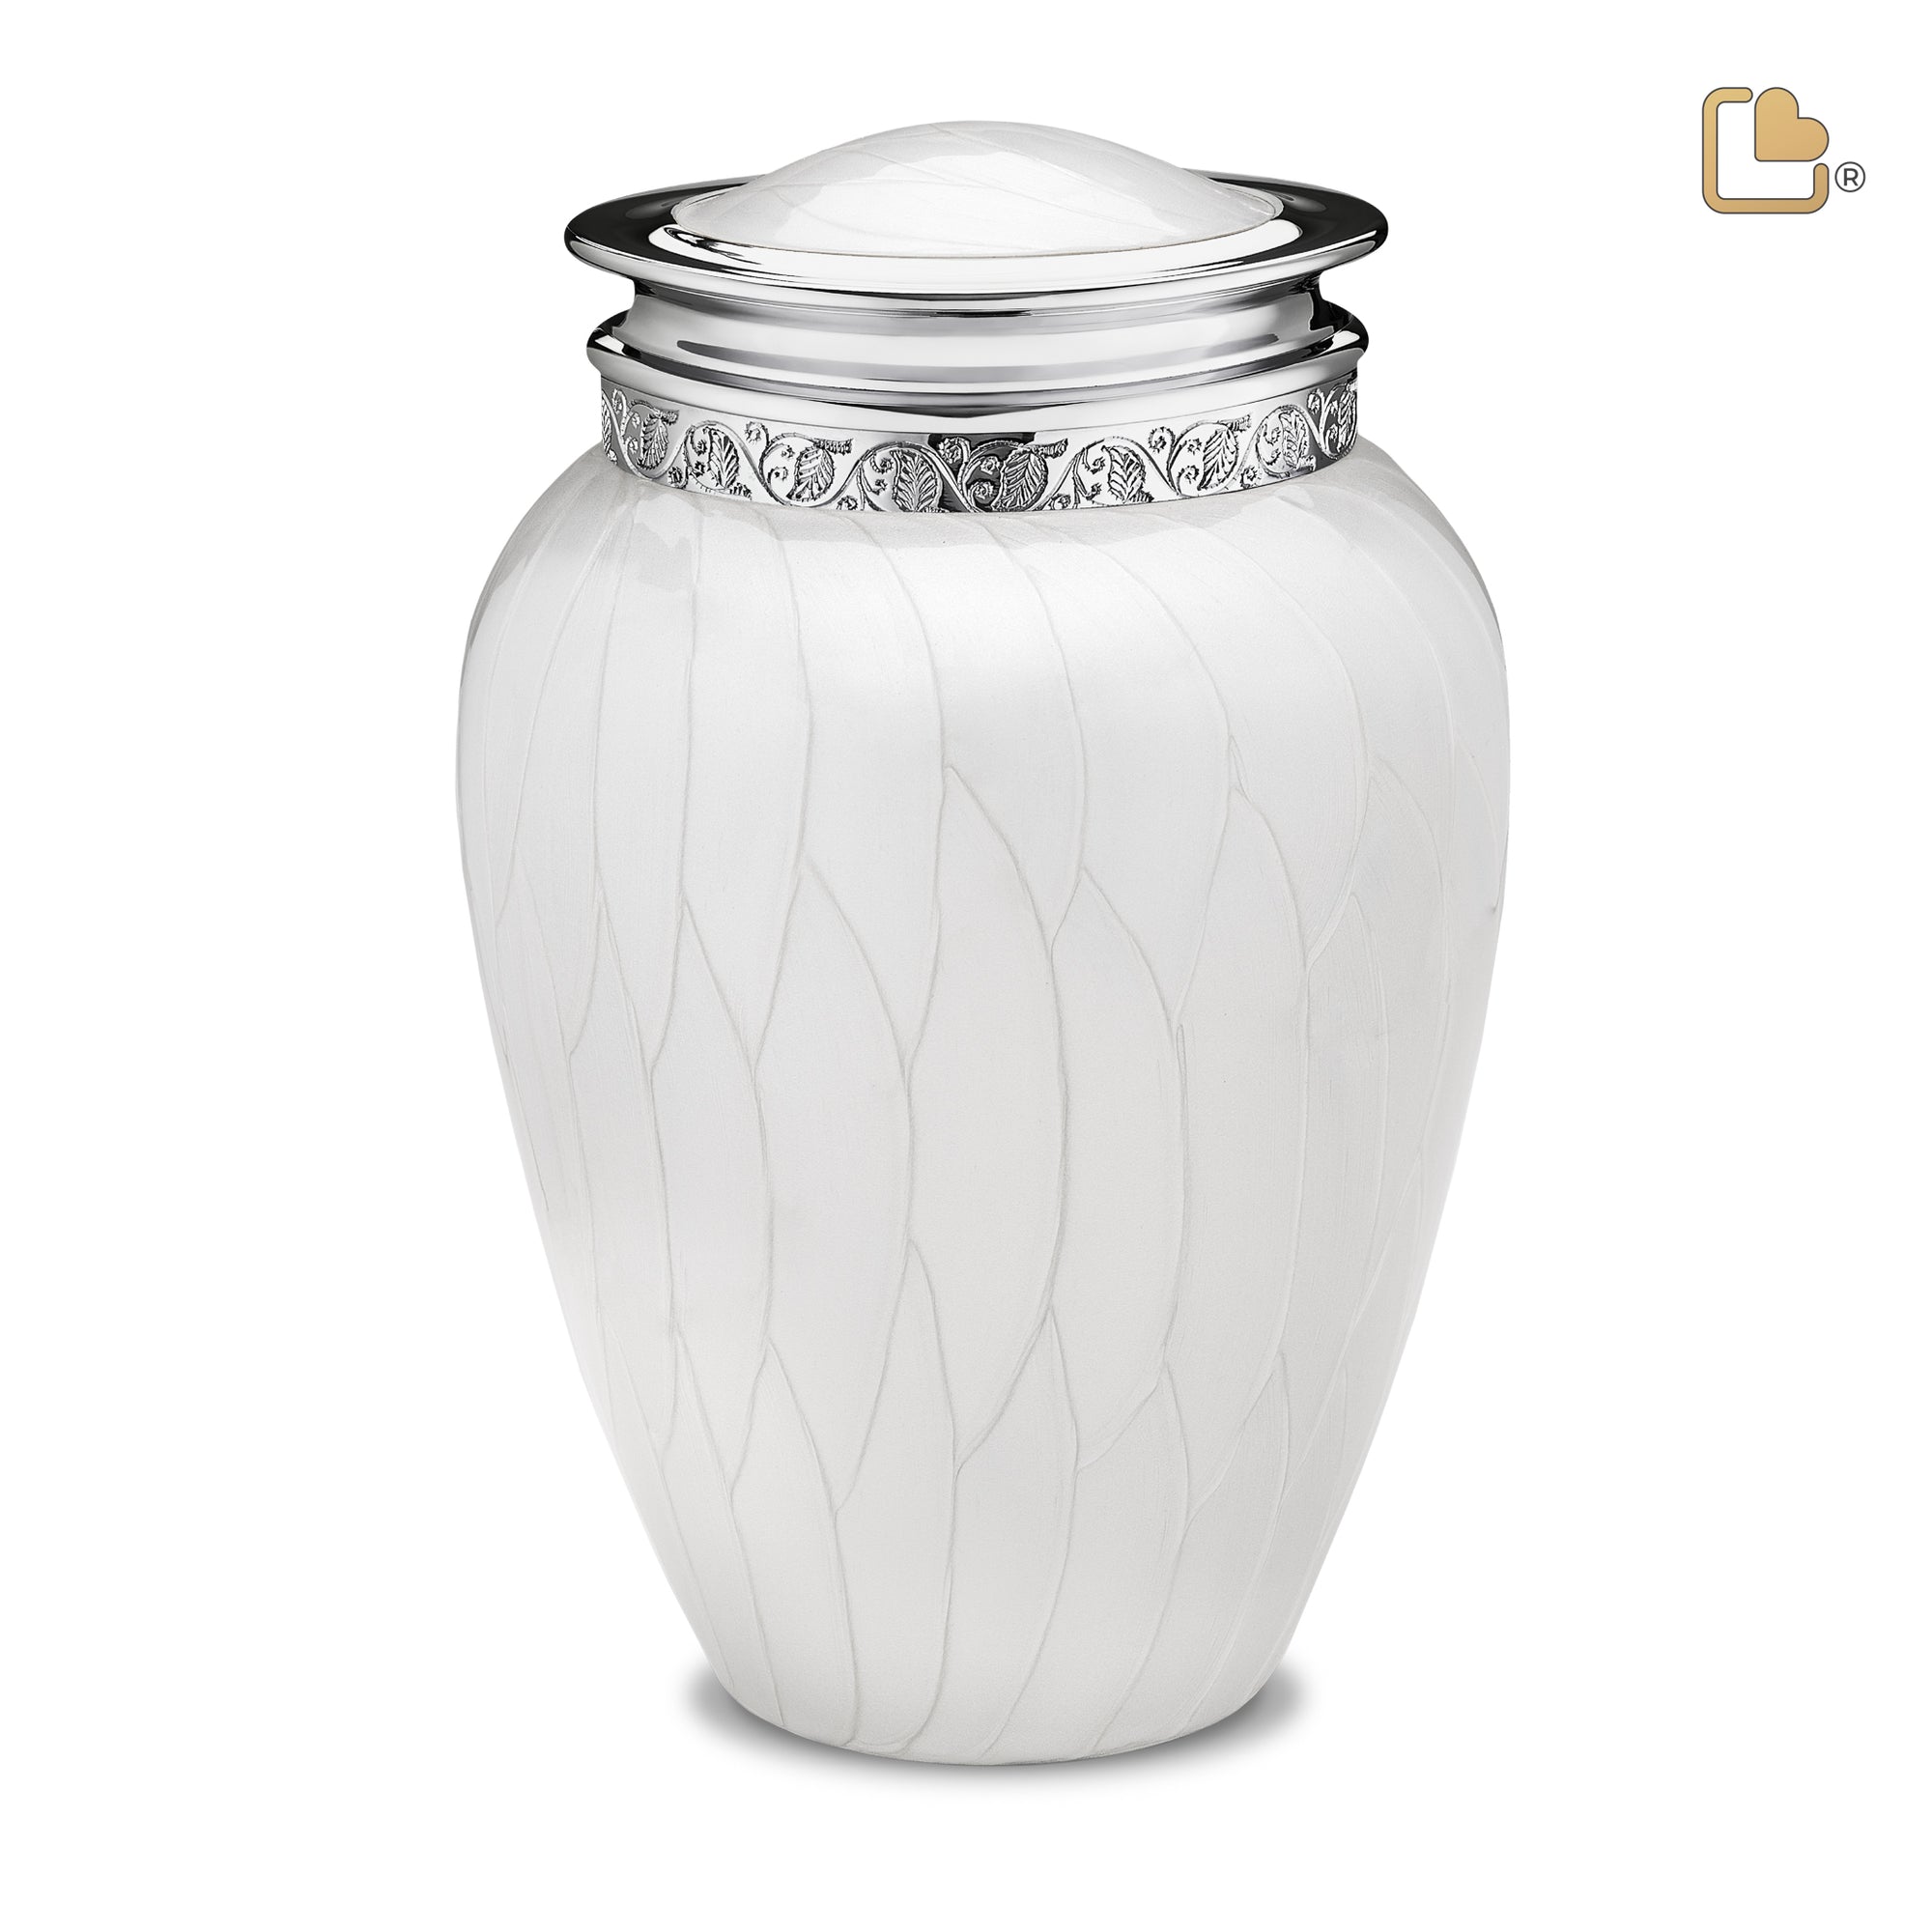 A297   Blessing Standard Adult Urn Pearl White & Pol Silver